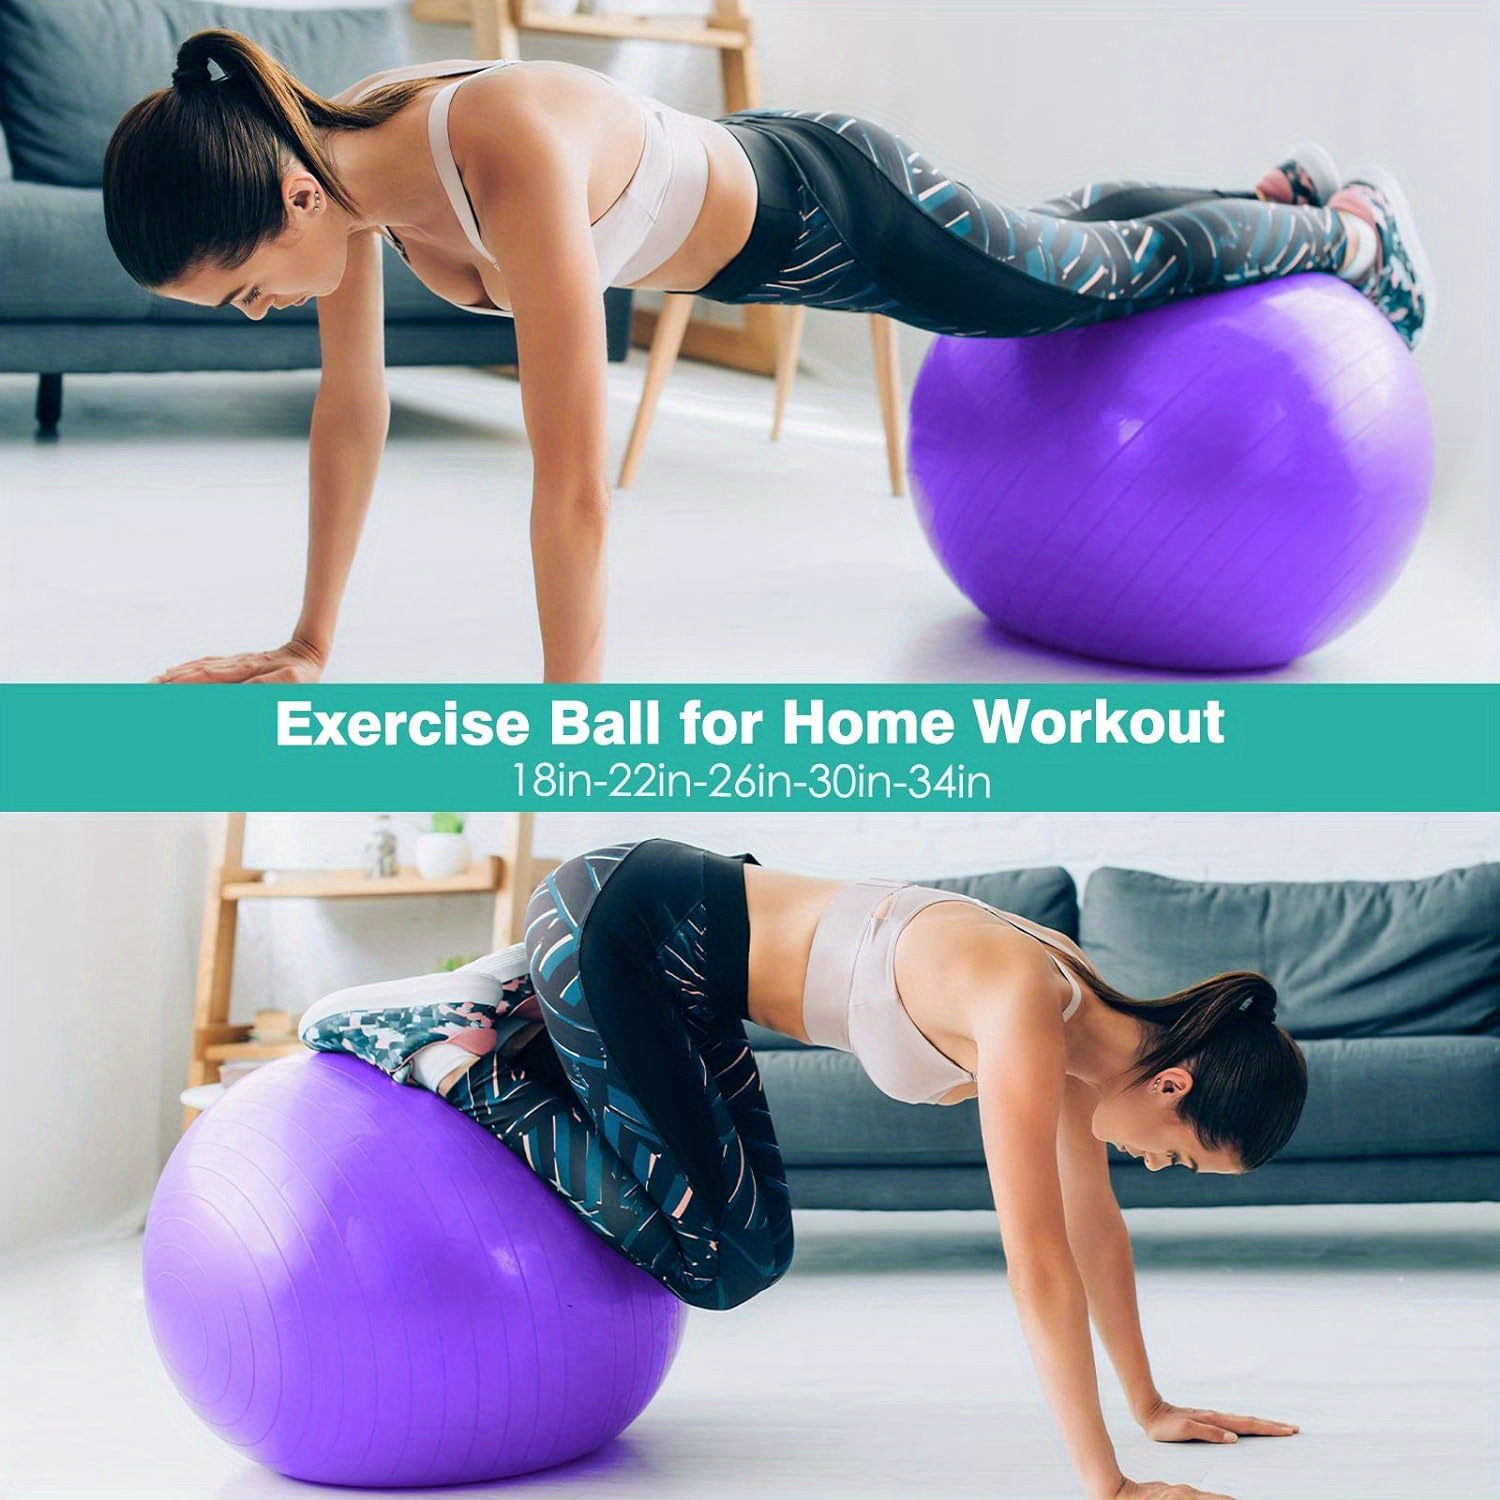 exercise yoga ball stability anti slip ball anti burst workout ball with quick pump balance ball for office home gym